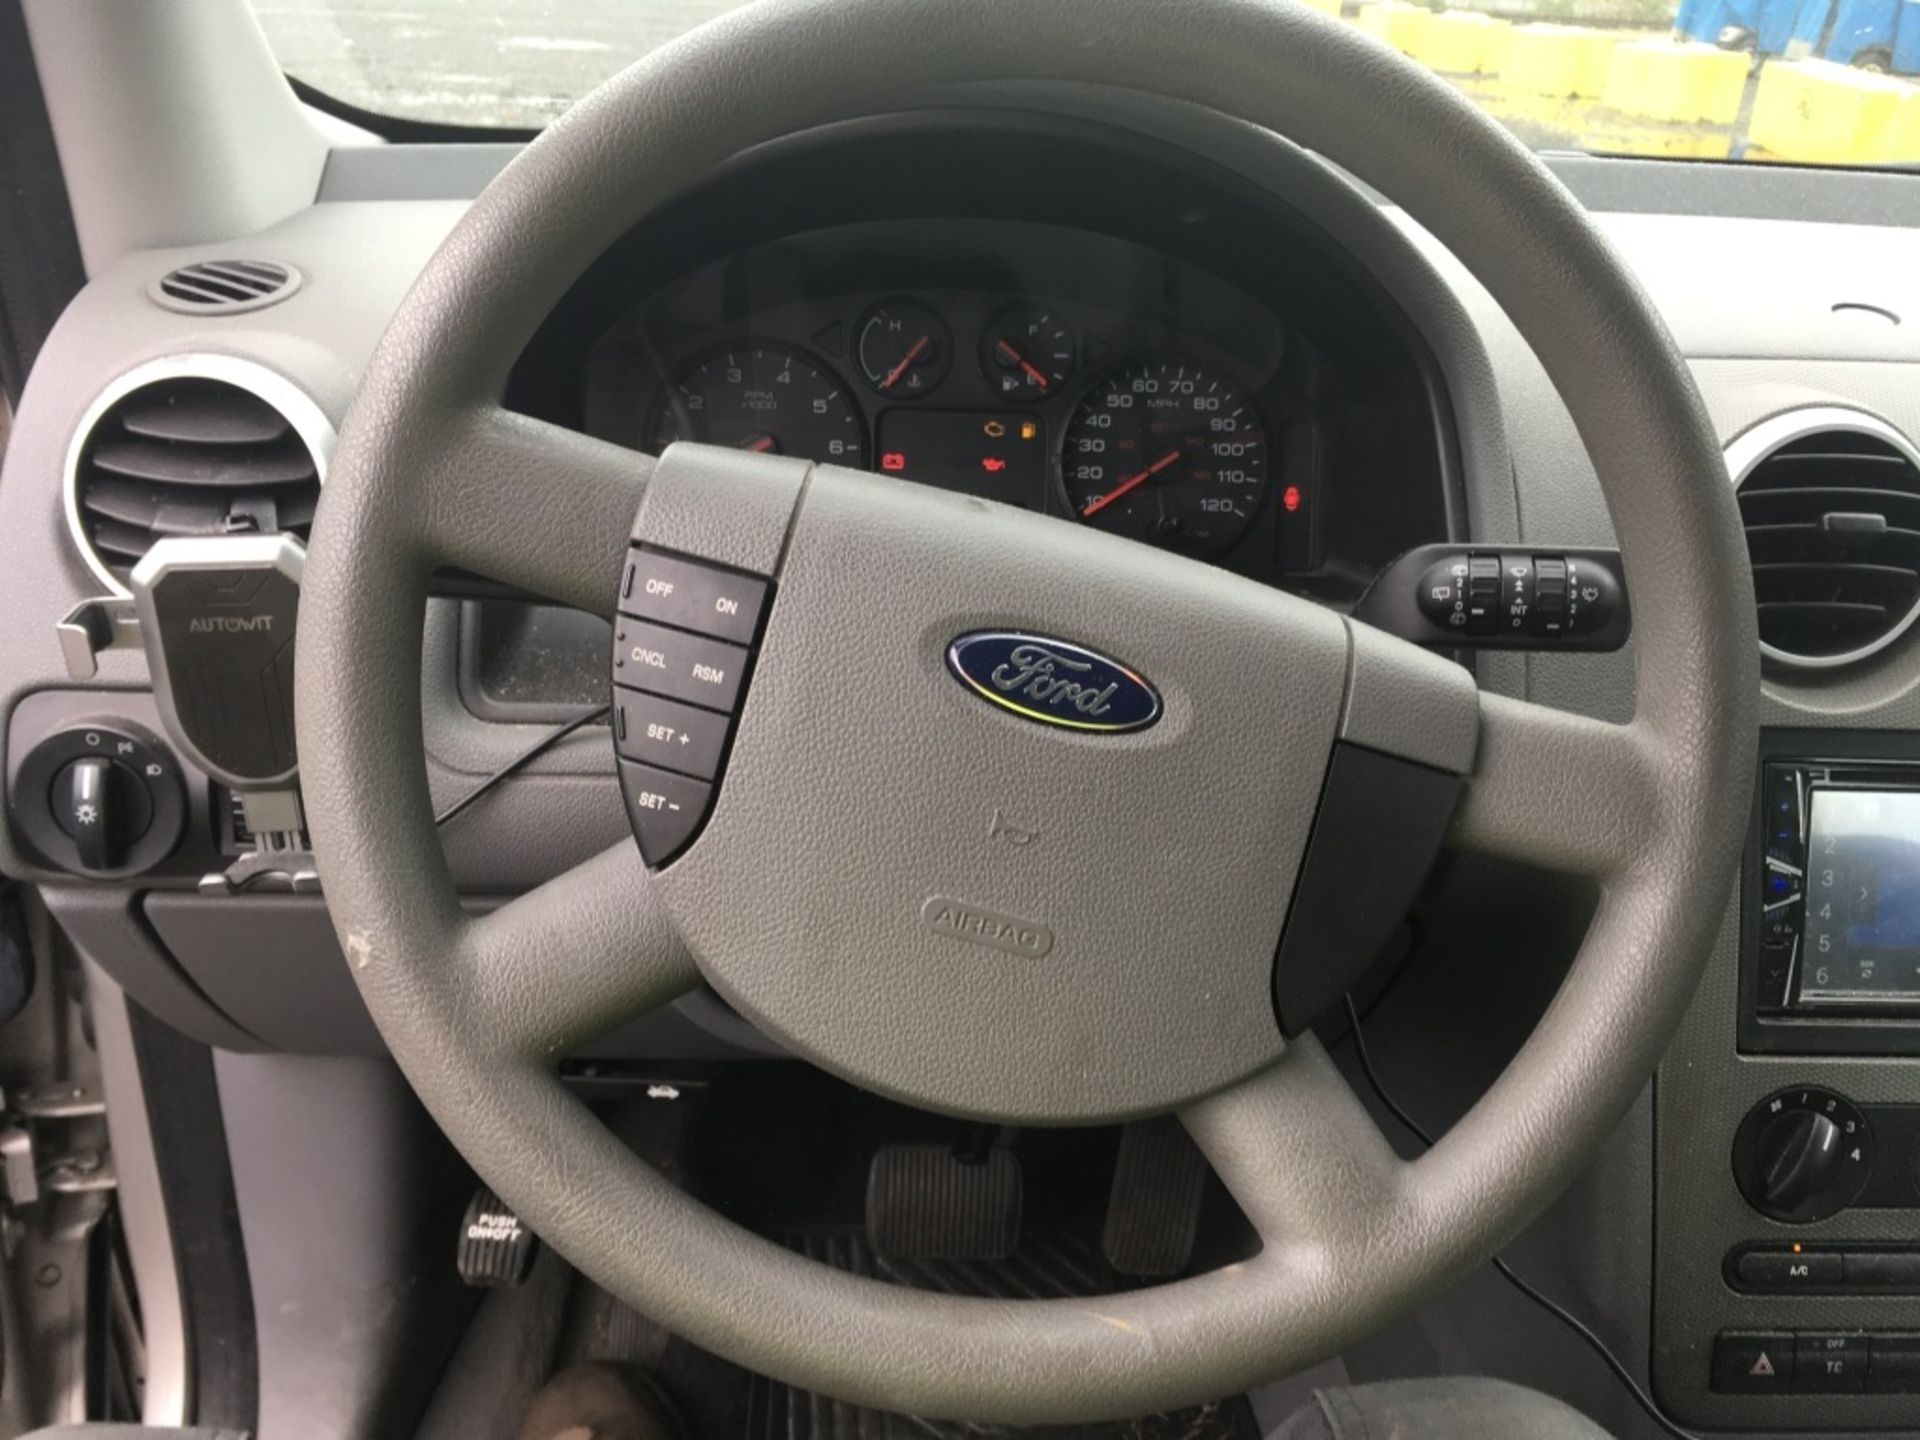 2006 Ford Freestyle Wagon - Image 12 of 19